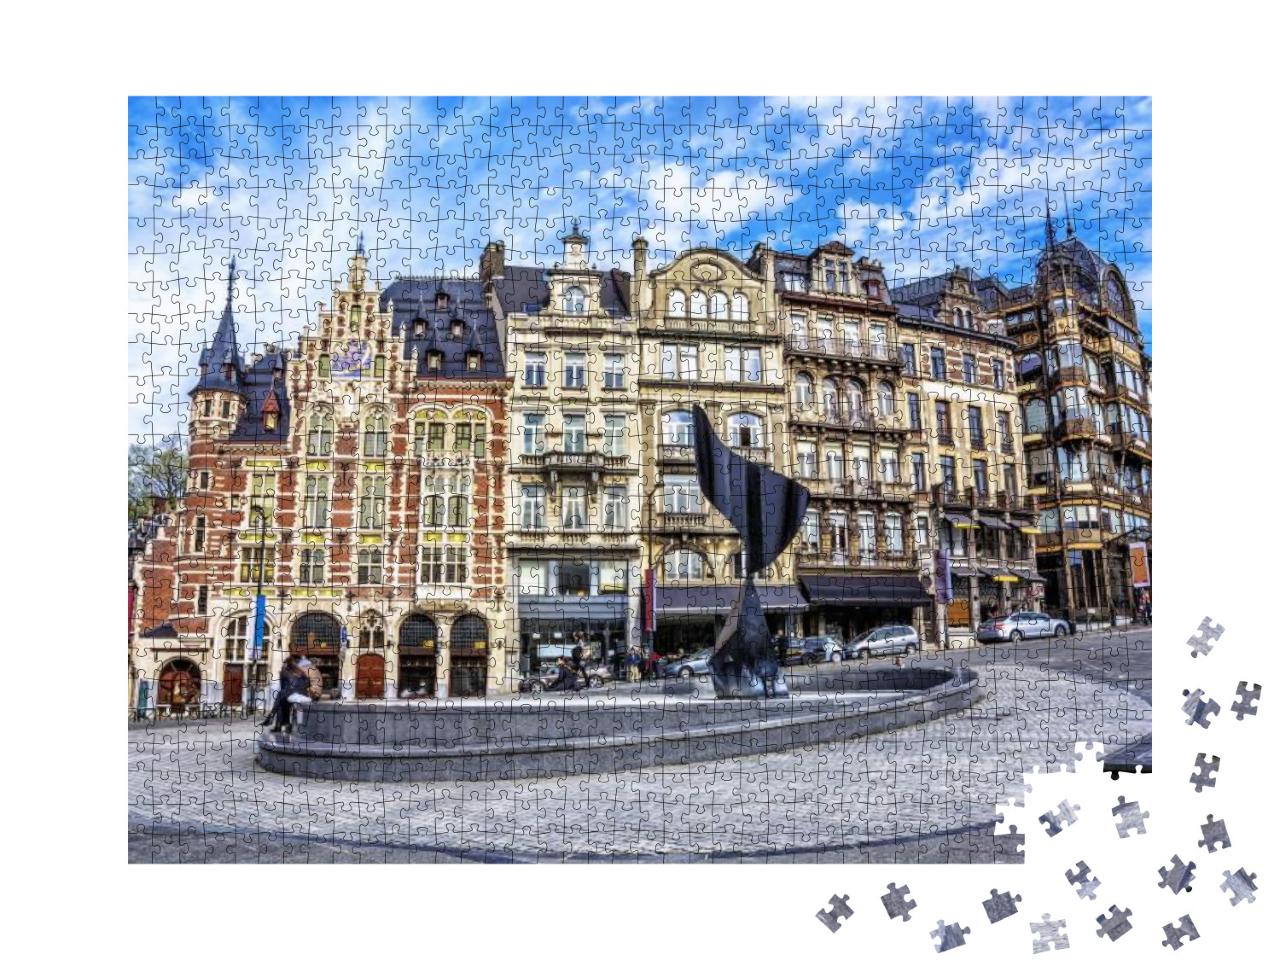 Traditional Buildings & Houses on the Streets of Brussels... Jigsaw Puzzle with 1000 pieces